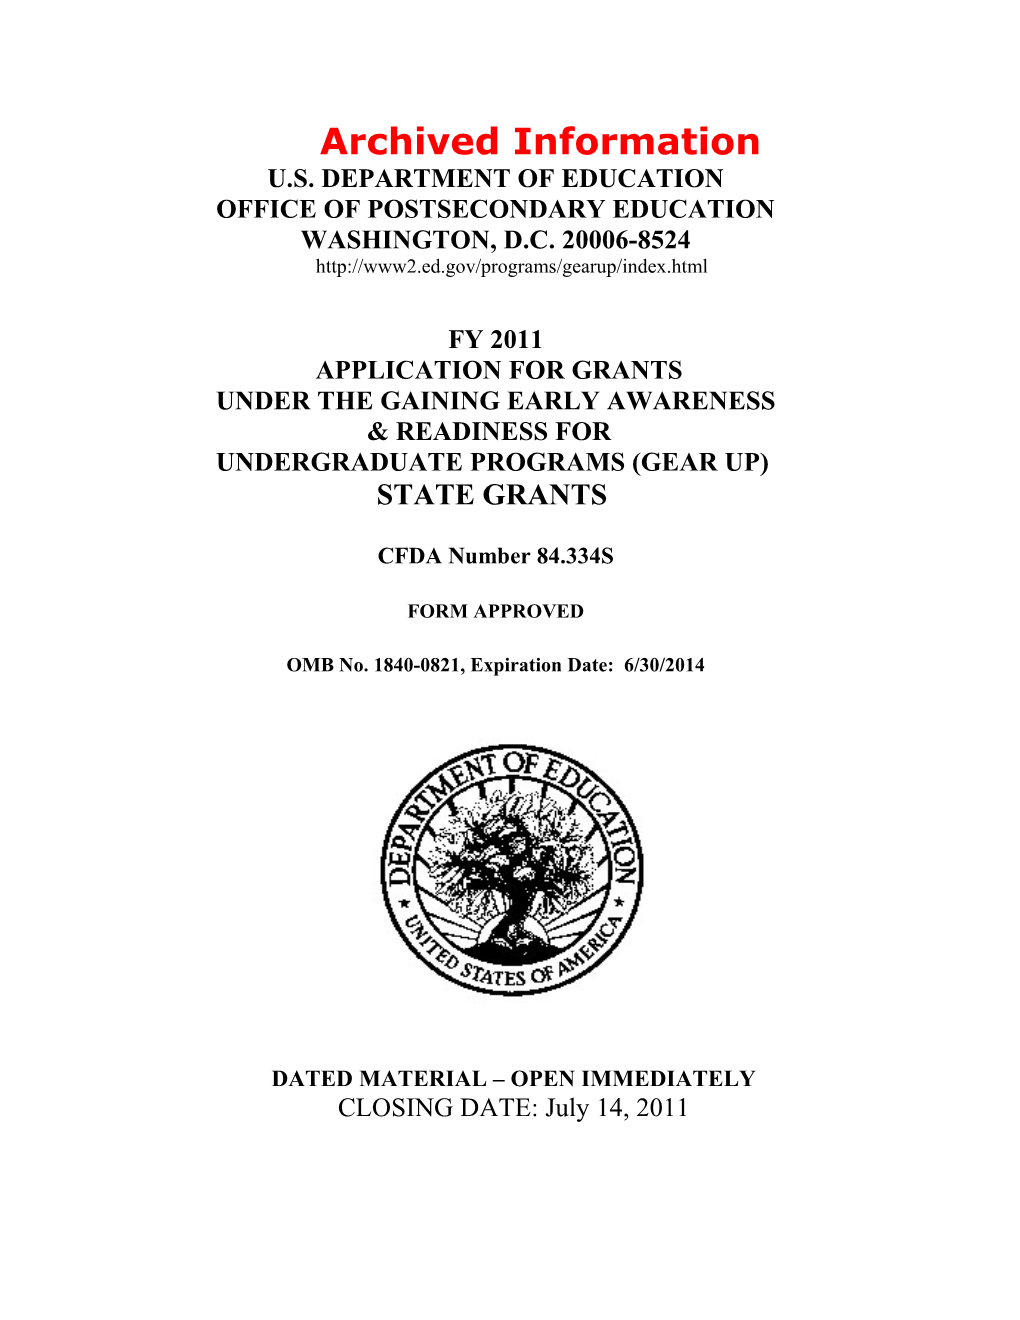 Archived: FY 2011 Grant Application - GEAR up State Grants (MS Word)